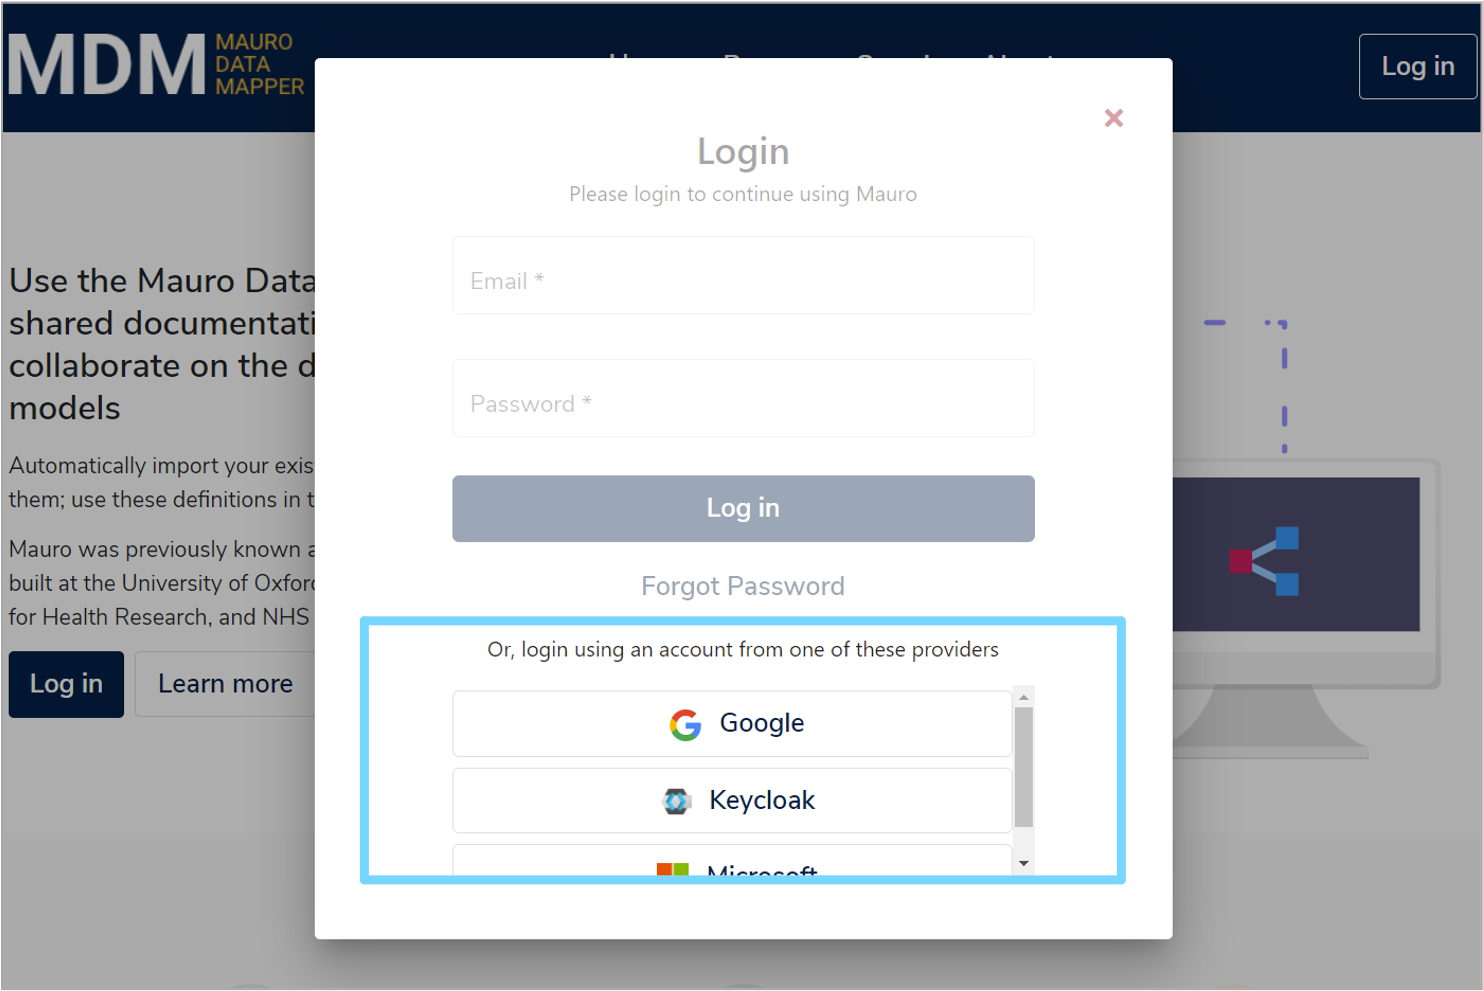 OpenID Connect provider options available in login form